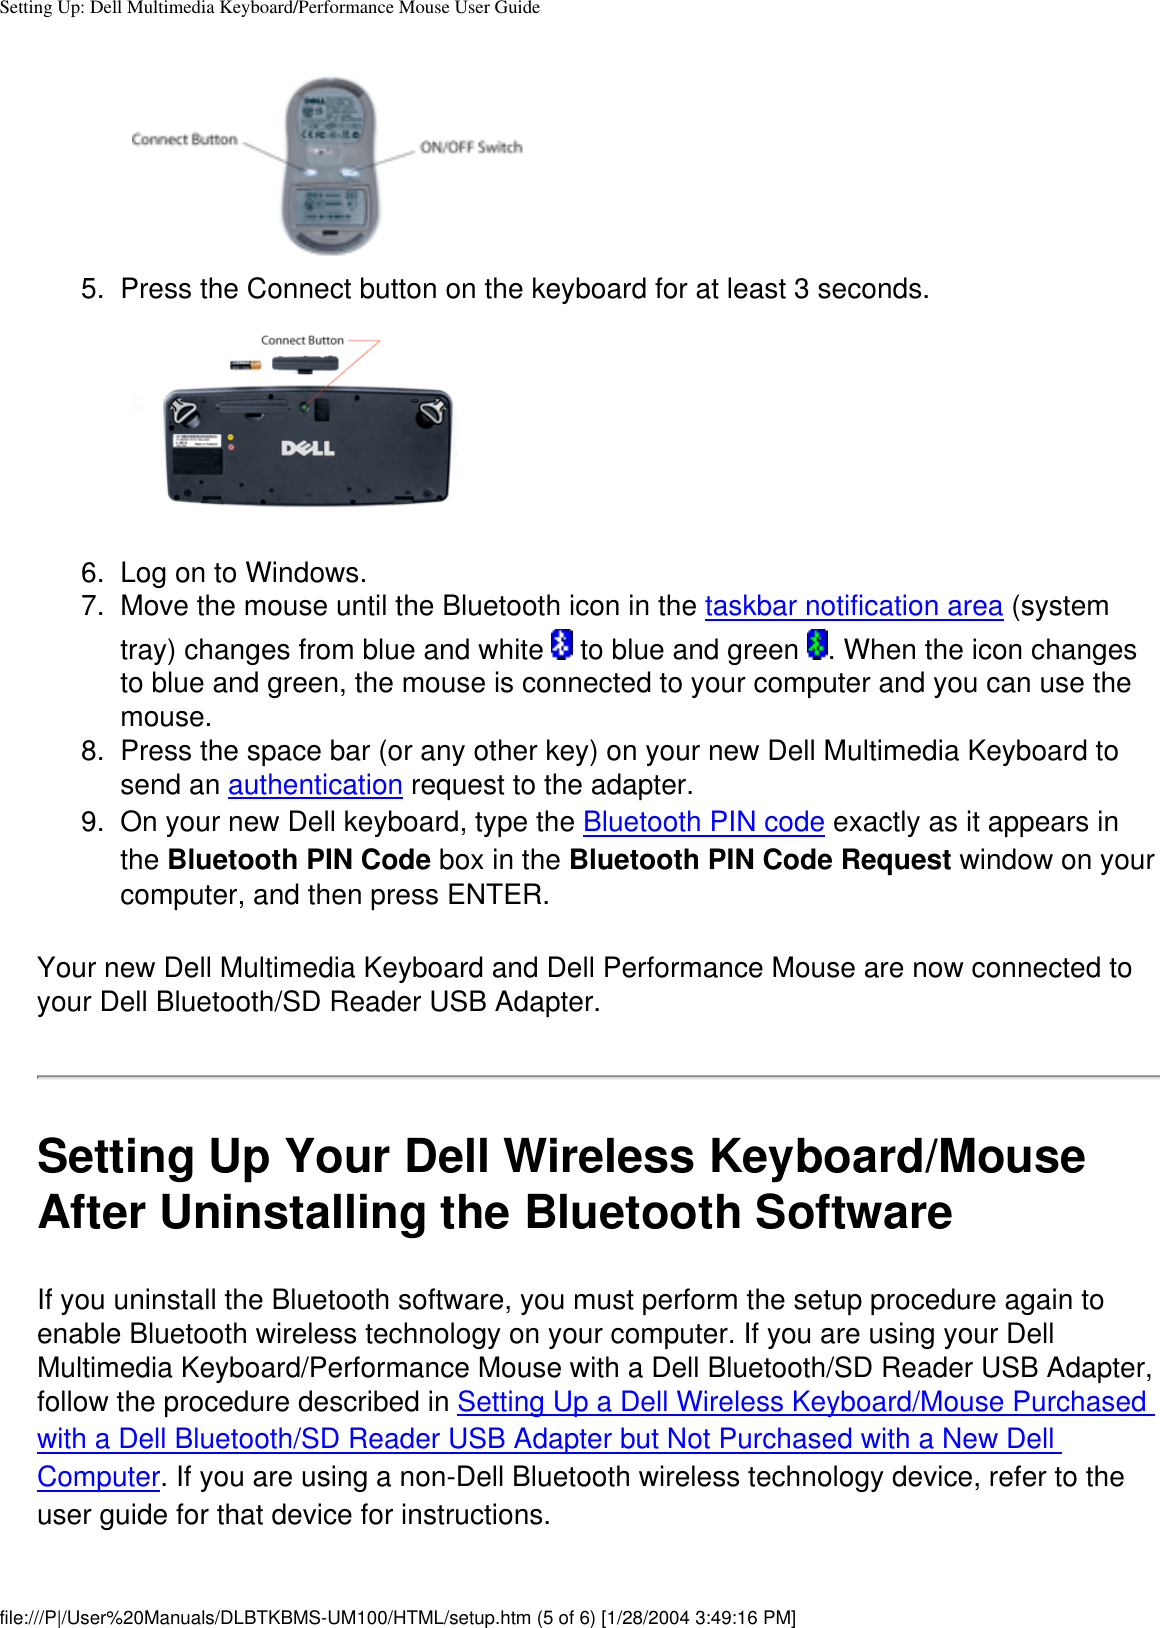 Setting Up: Dell Multimedia Keyboard/Performance Mouse User Guide5.  Press the Connect button on the keyboard for at least 3 seconds. 6.  Log on to Windows.7.  Move the mouse until the Bluetooth icon in the taskbar notification area (system tray) changes from blue and white   to blue and green  . When the icon changes to blue and green, the mouse is connected to your computer and you can use the mouse.8.  Press the space bar (or any other key) on your new Dell Multimedia Keyboard to send an authentication request to the adapter.9.  On your new Dell keyboard, type the Bluetooth PIN code exactly as it appears in the Bluetooth PIN Code box in the Bluetooth PIN Code Request window on your computer, and then press ENTER. Your new Dell Multimedia Keyboard and Dell Performance Mouse are now connected to your Dell Bluetooth/SD Reader USB Adapter.Setting Up Your Dell Wireless Keyboard/Mouse After Uninstalling the Bluetooth SoftwareIf you uninstall the Bluetooth software, you must perform the setup procedure again to enable Bluetooth wireless technology on your computer. If you are using your Dell Multimedia Keyboard/Performance Mouse with a Dell Bluetooth/SD Reader USB Adapter, follow the procedure described in Setting Up a Dell Wireless Keyboard/Mouse Purchased with a Dell Bluetooth/SD Reader USB Adapter but Not Purchased with a New Dell Computer. If you are using a non-Dell Bluetooth wireless technology device, refer to the user guide for that device for instructions.file:///P|/User%20Manuals/DLBTKBMS-UM100/HTML/setup.htm (5 of 6) [1/28/2004 3:49:16 PM]